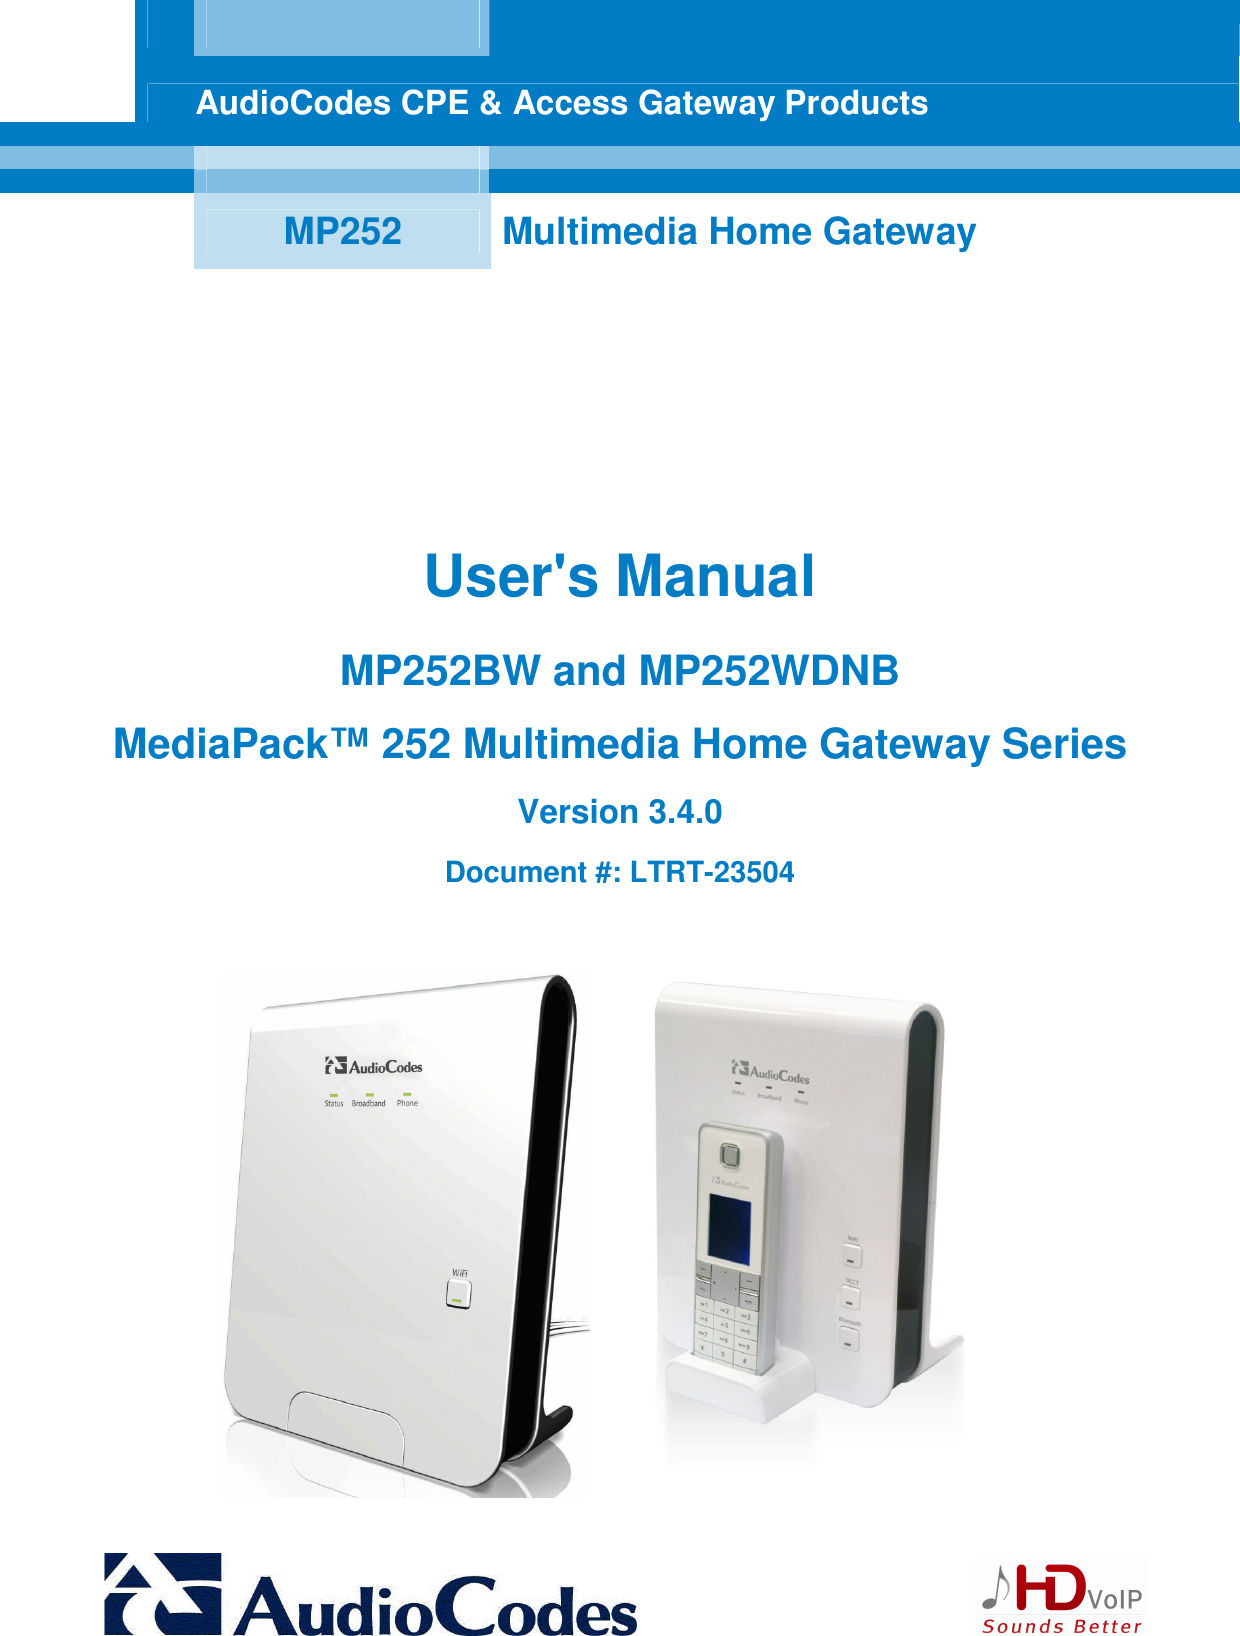      AudioCodes CPE &amp; Access Gateway Products        MP252  Multimedia Home Gateway        User&apos;s Manual   MP252BW and MP252WDNB MediaPack™ 252 Multimedia Home Gateway Series Version 3.4.0 Document #: LTRT-23504    